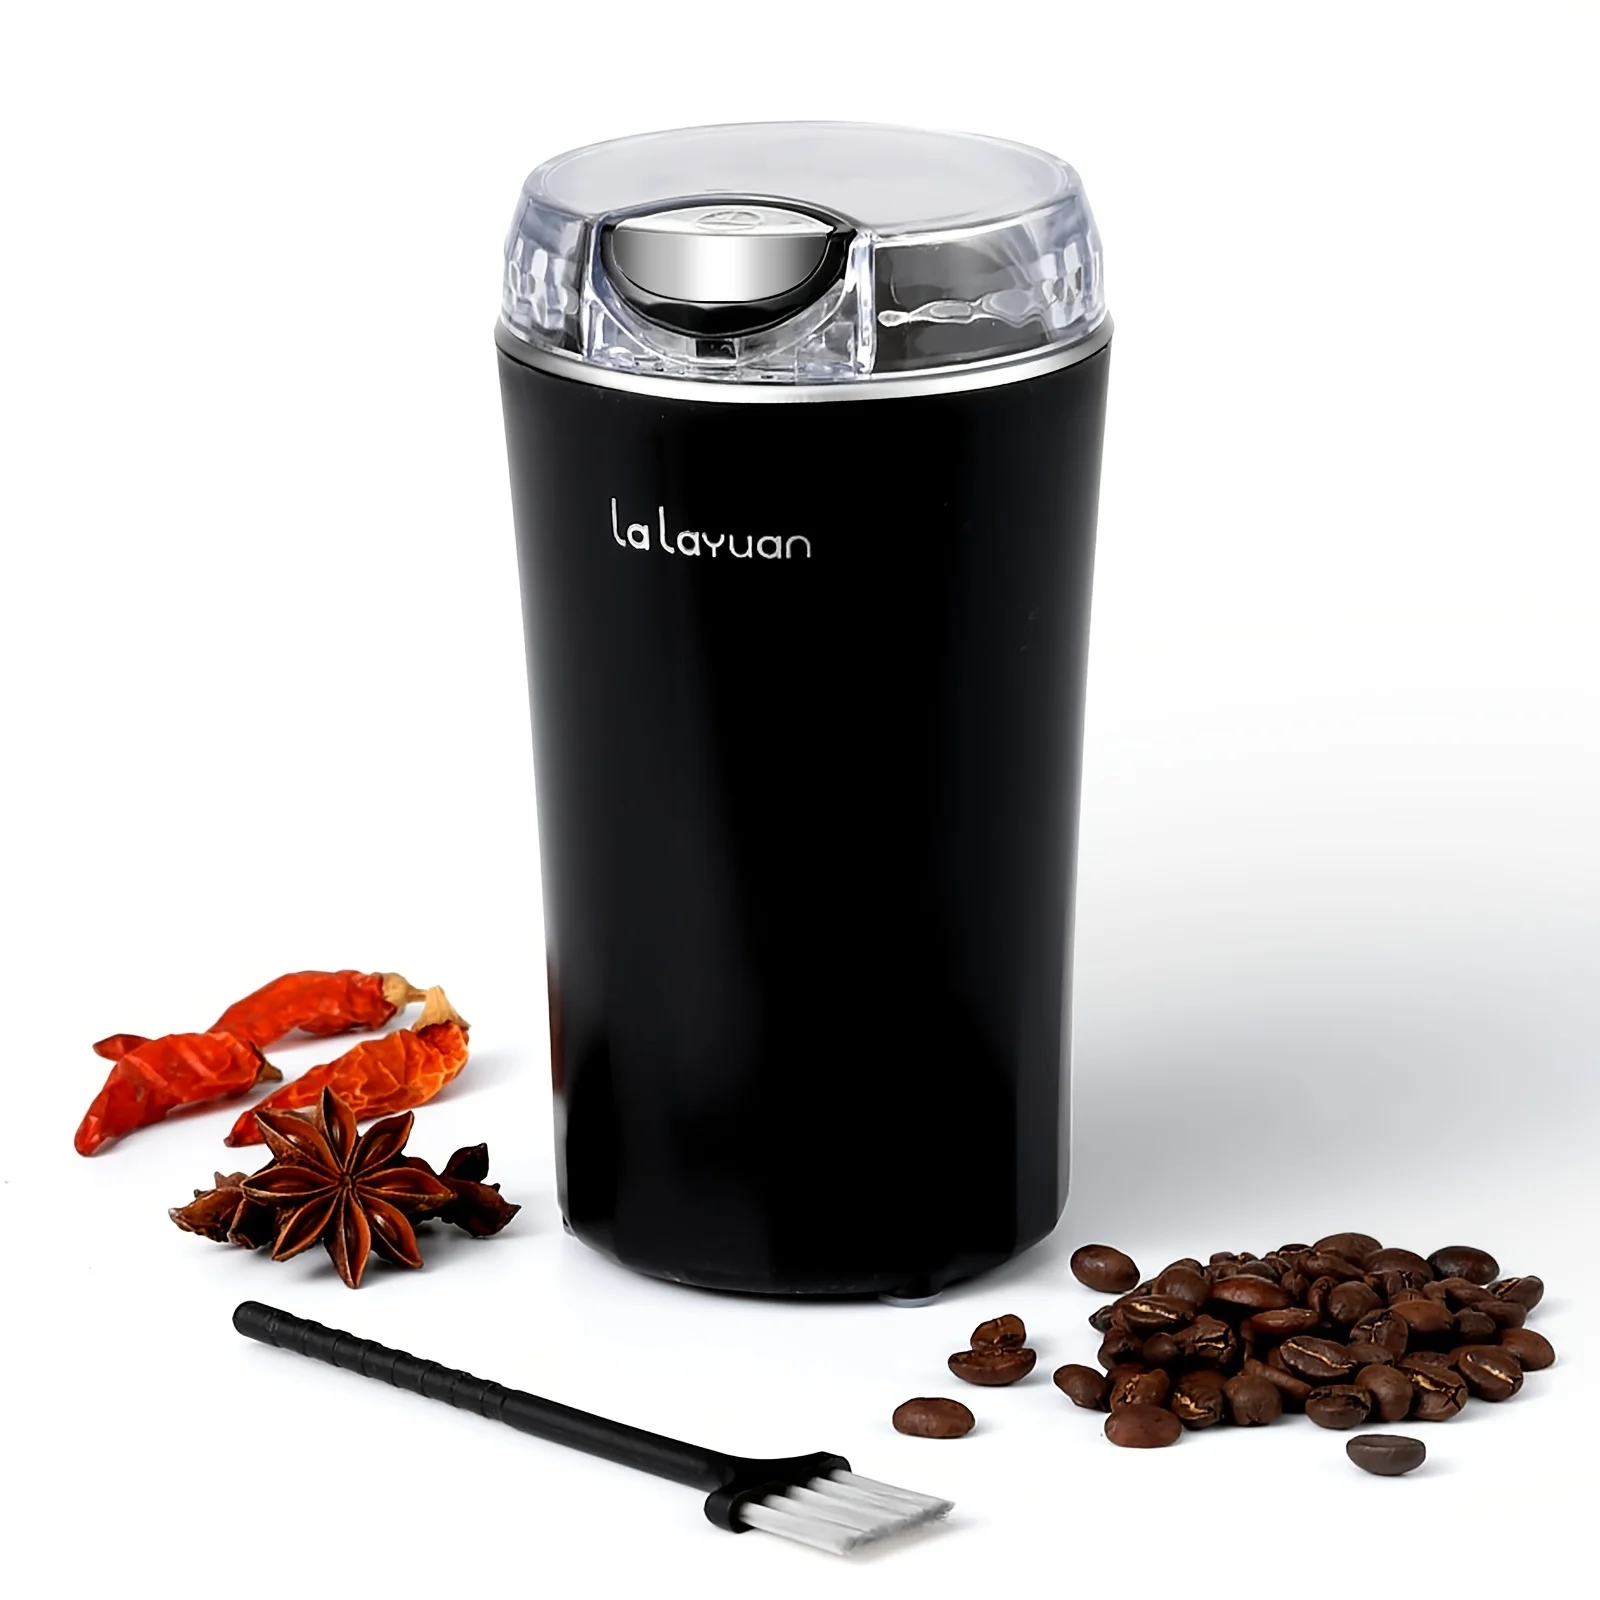 

1pc Powerful 200W Electric Coffee Bean Grinder with One Touch Push-Button Control - Perfect for Espresso, Spices, Herbs, and Nut